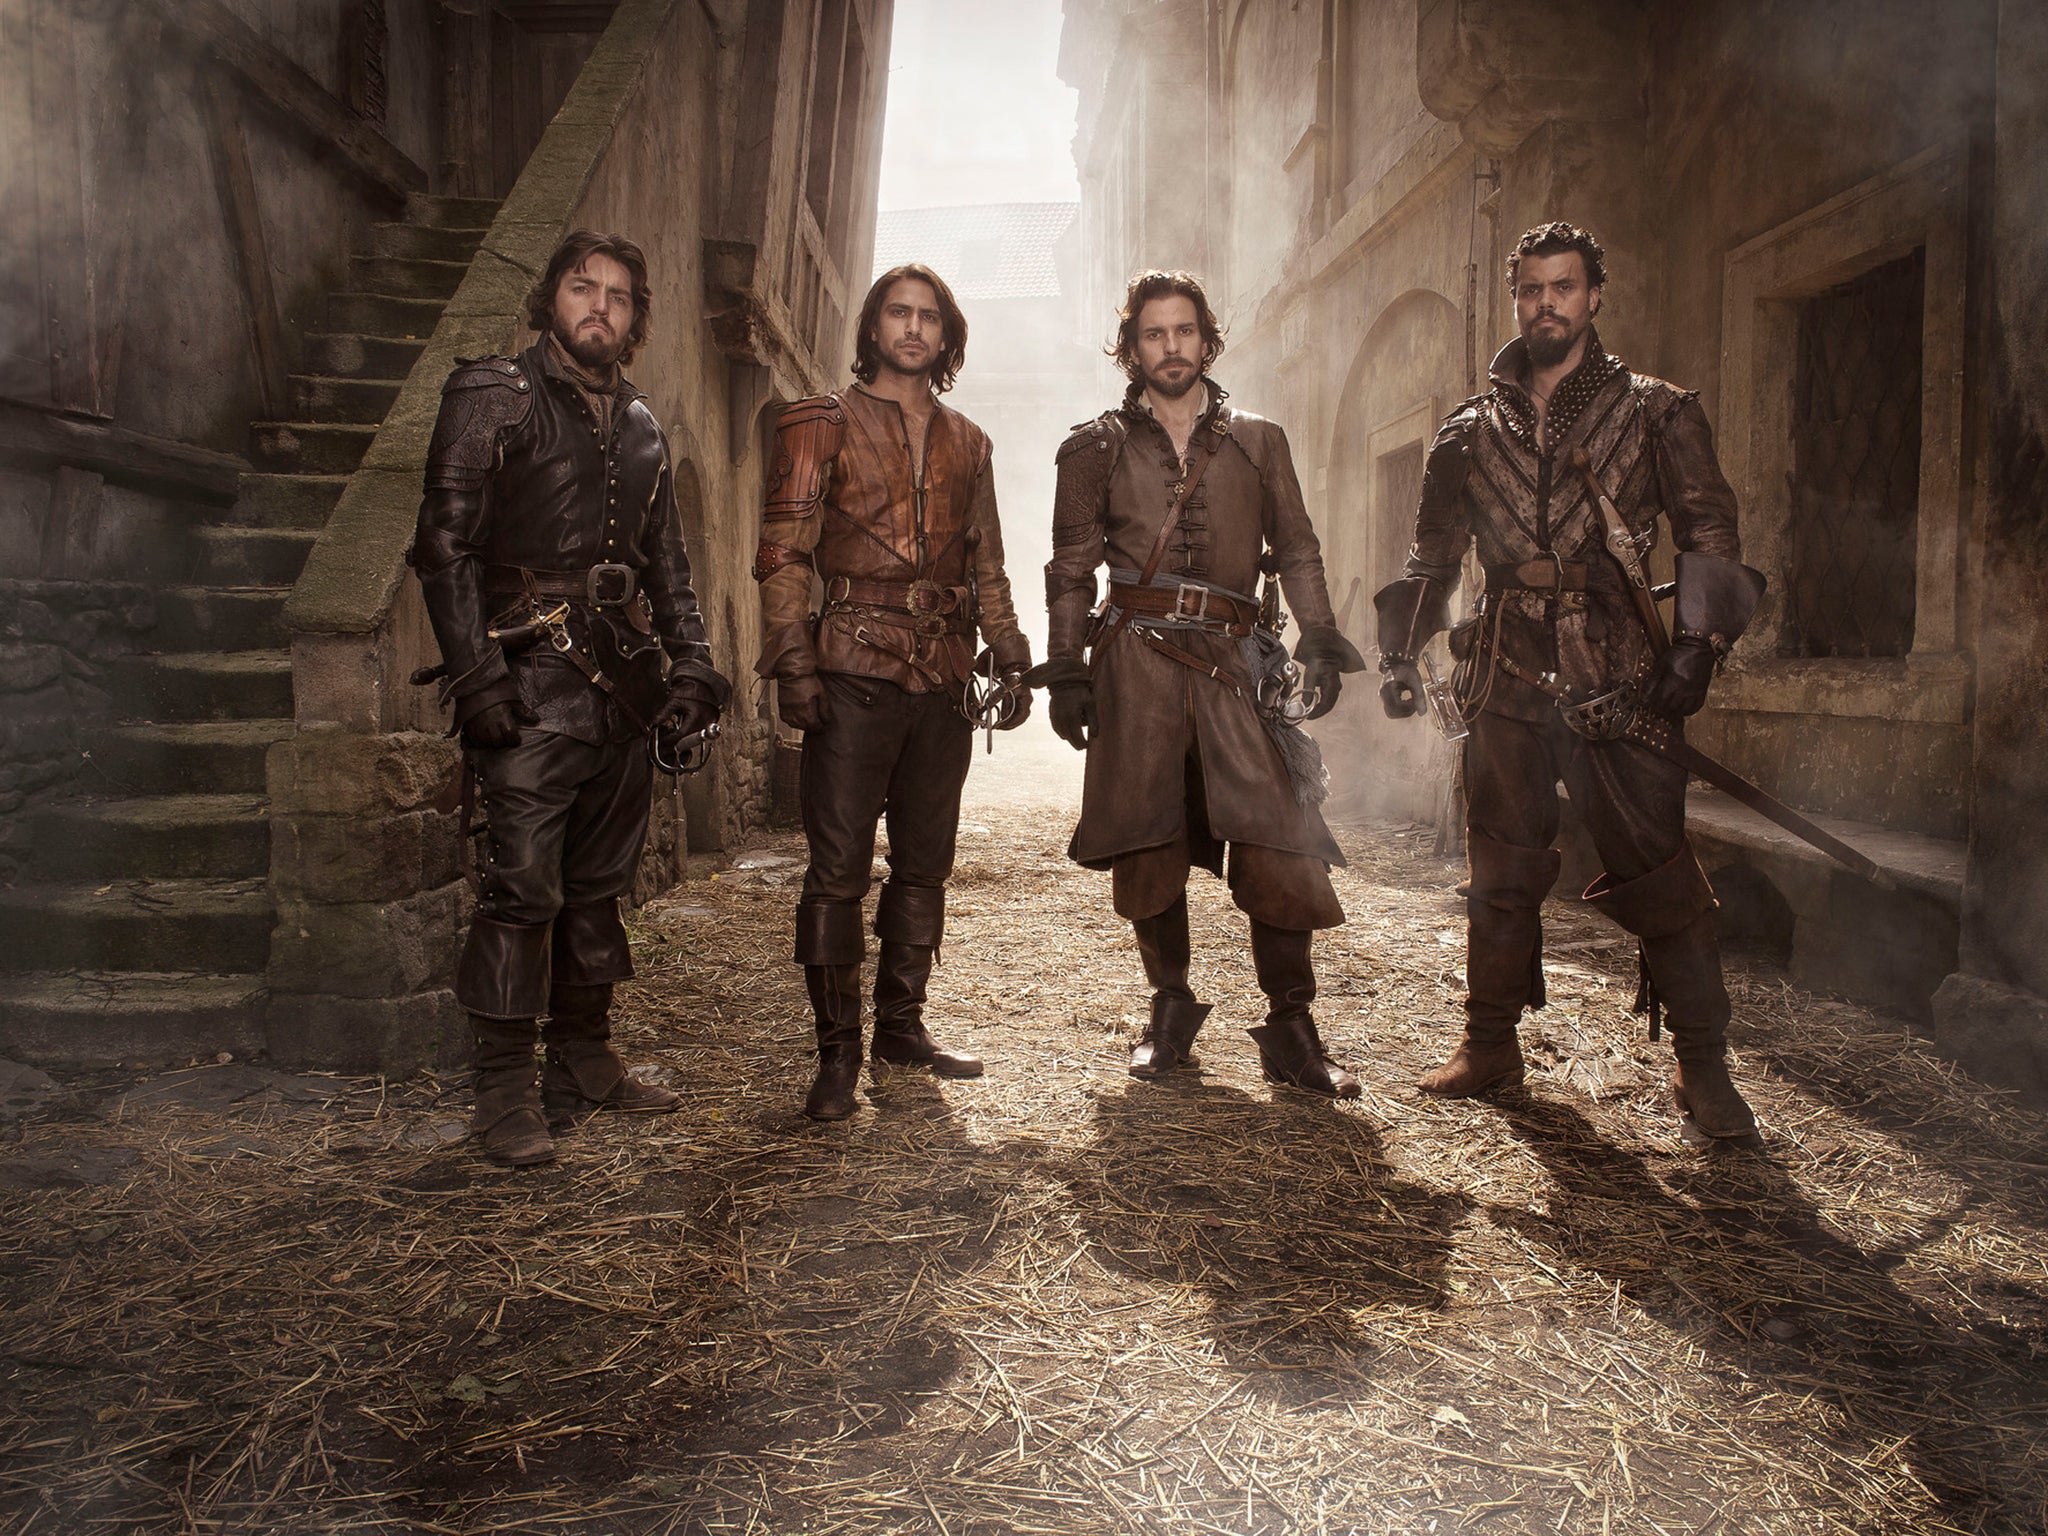 'The Musketeers' return this year for a second series